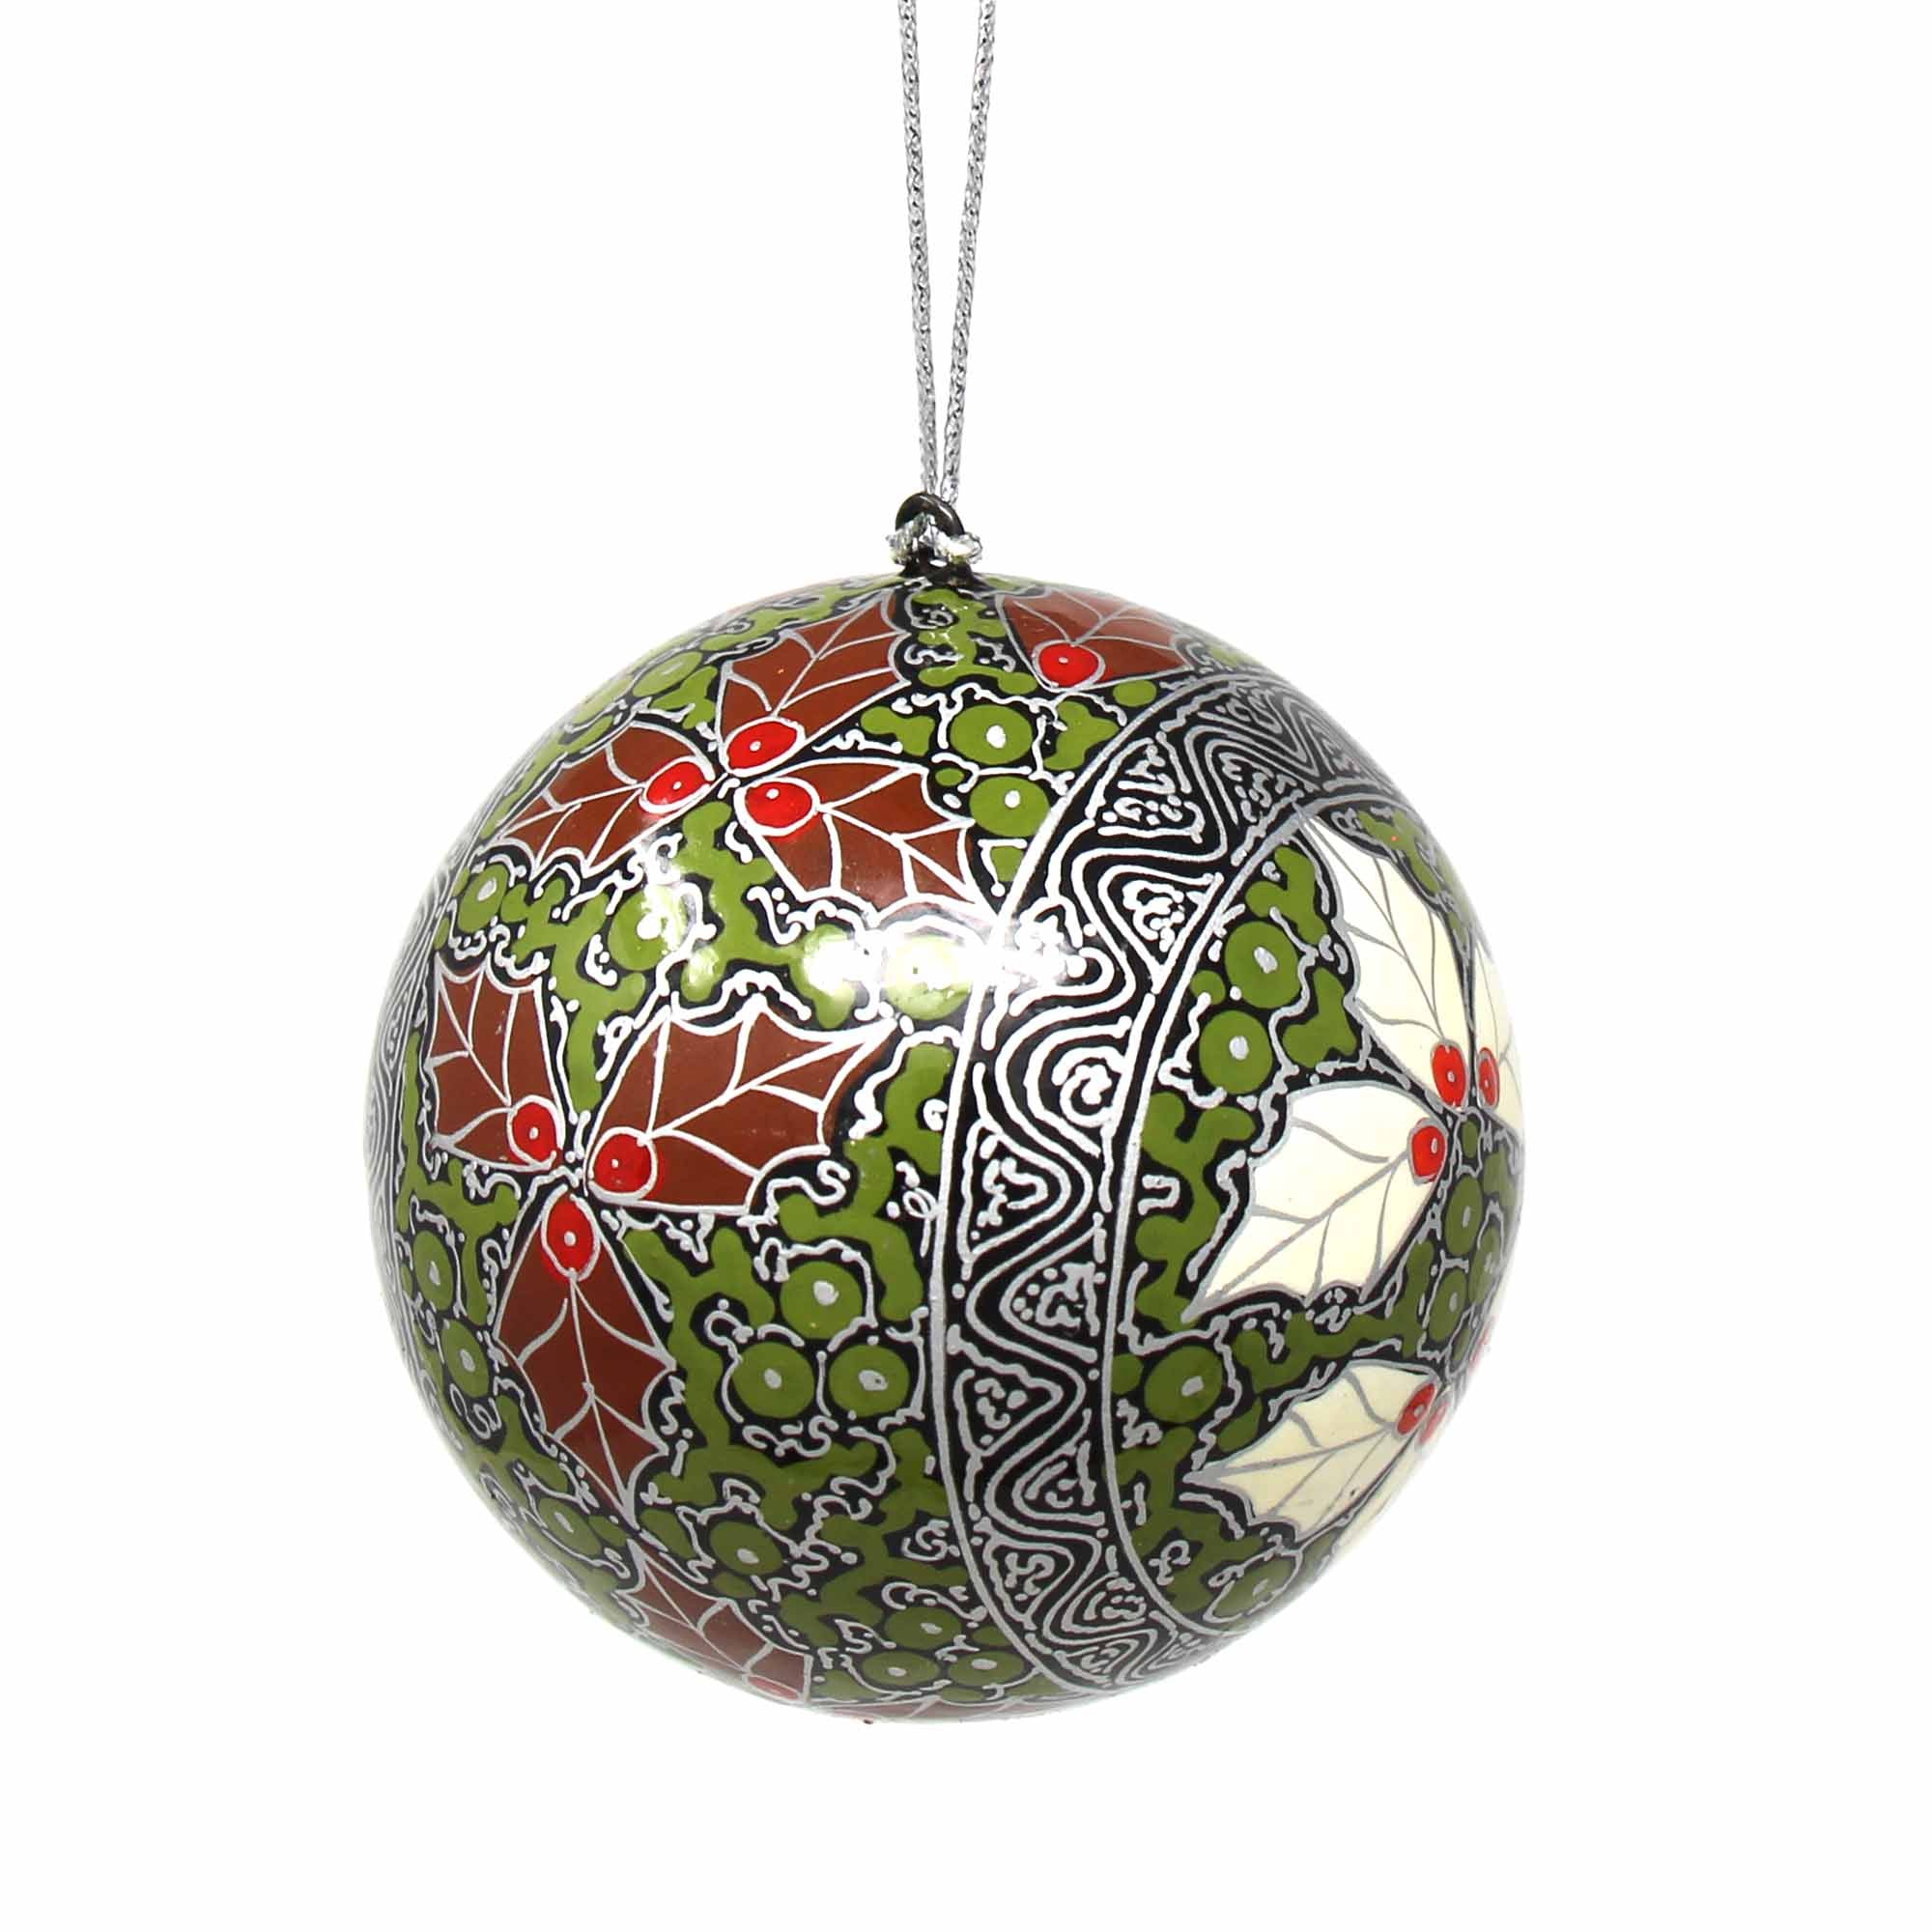 Handpainted Ornaments, Silver Chinar Leaves - Pack of 3